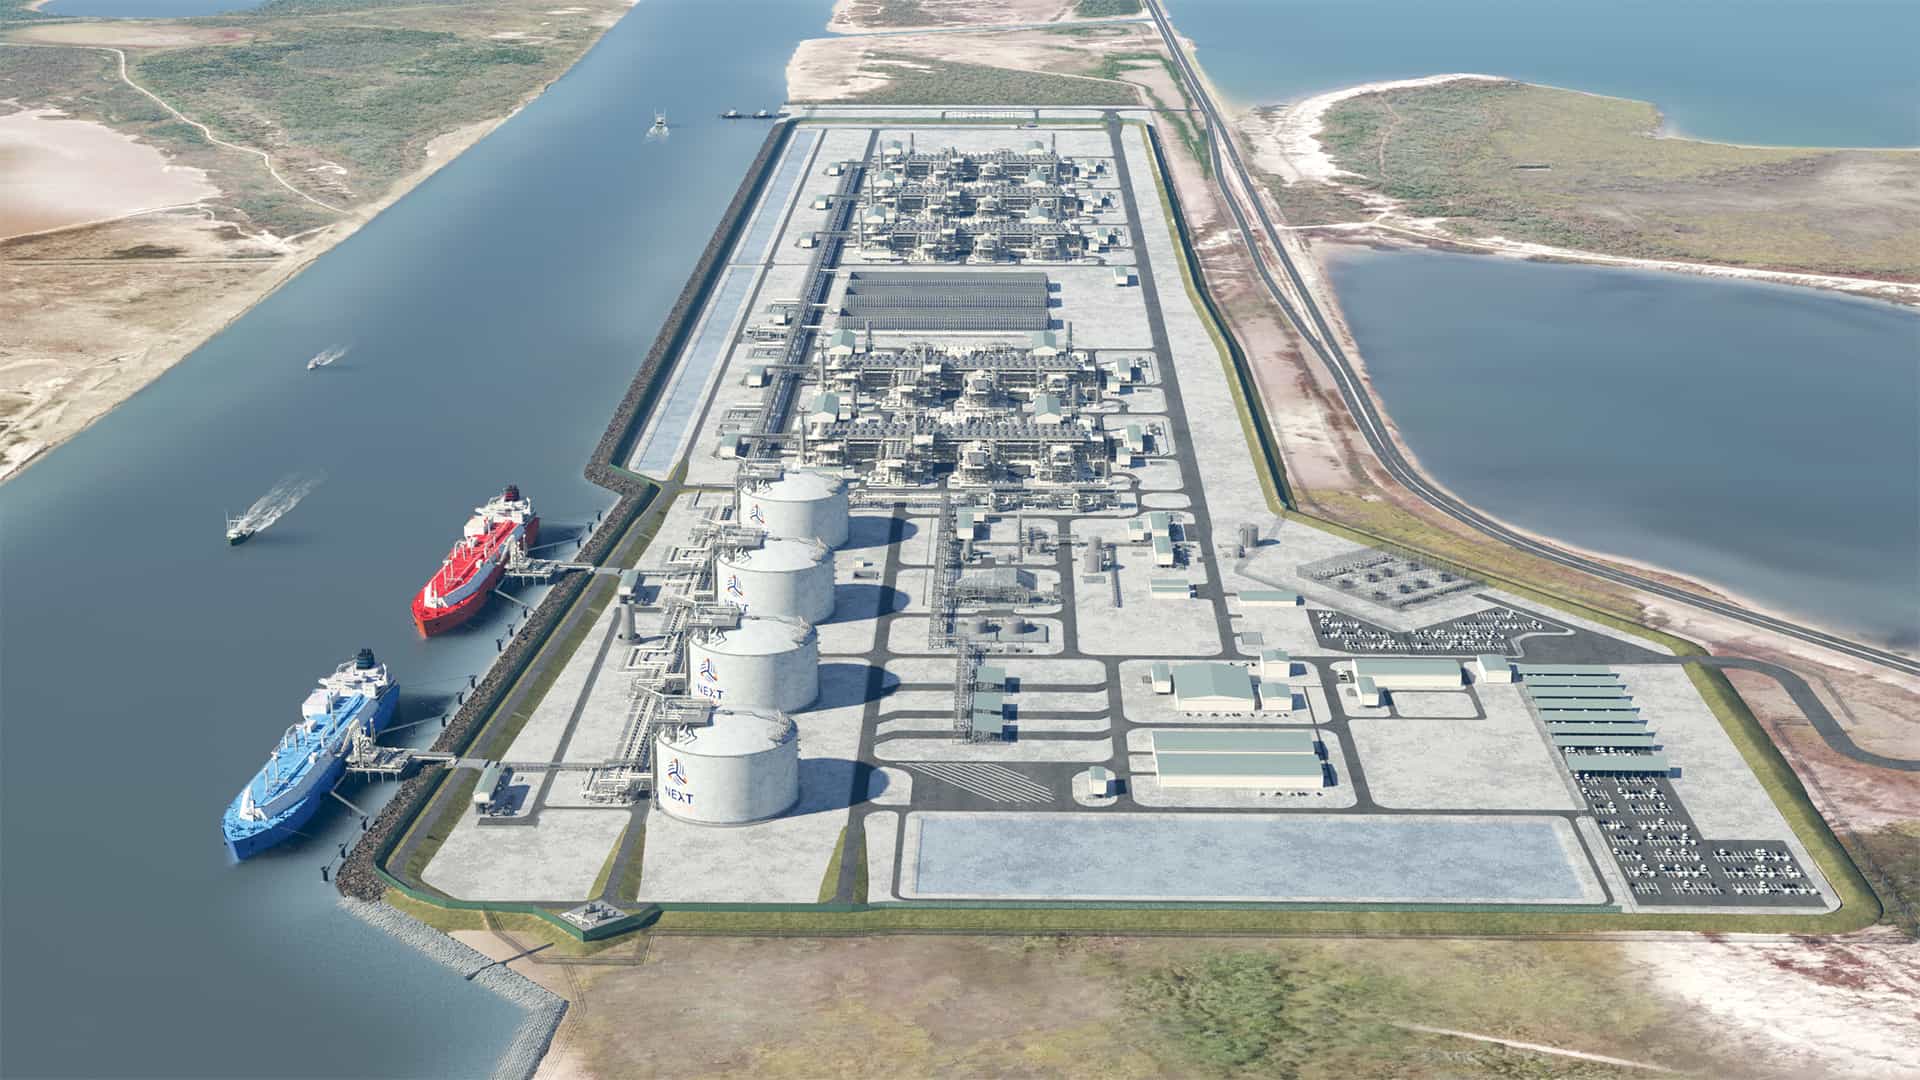 Great Lakes to start Rio Grande LNG dredging job later this year